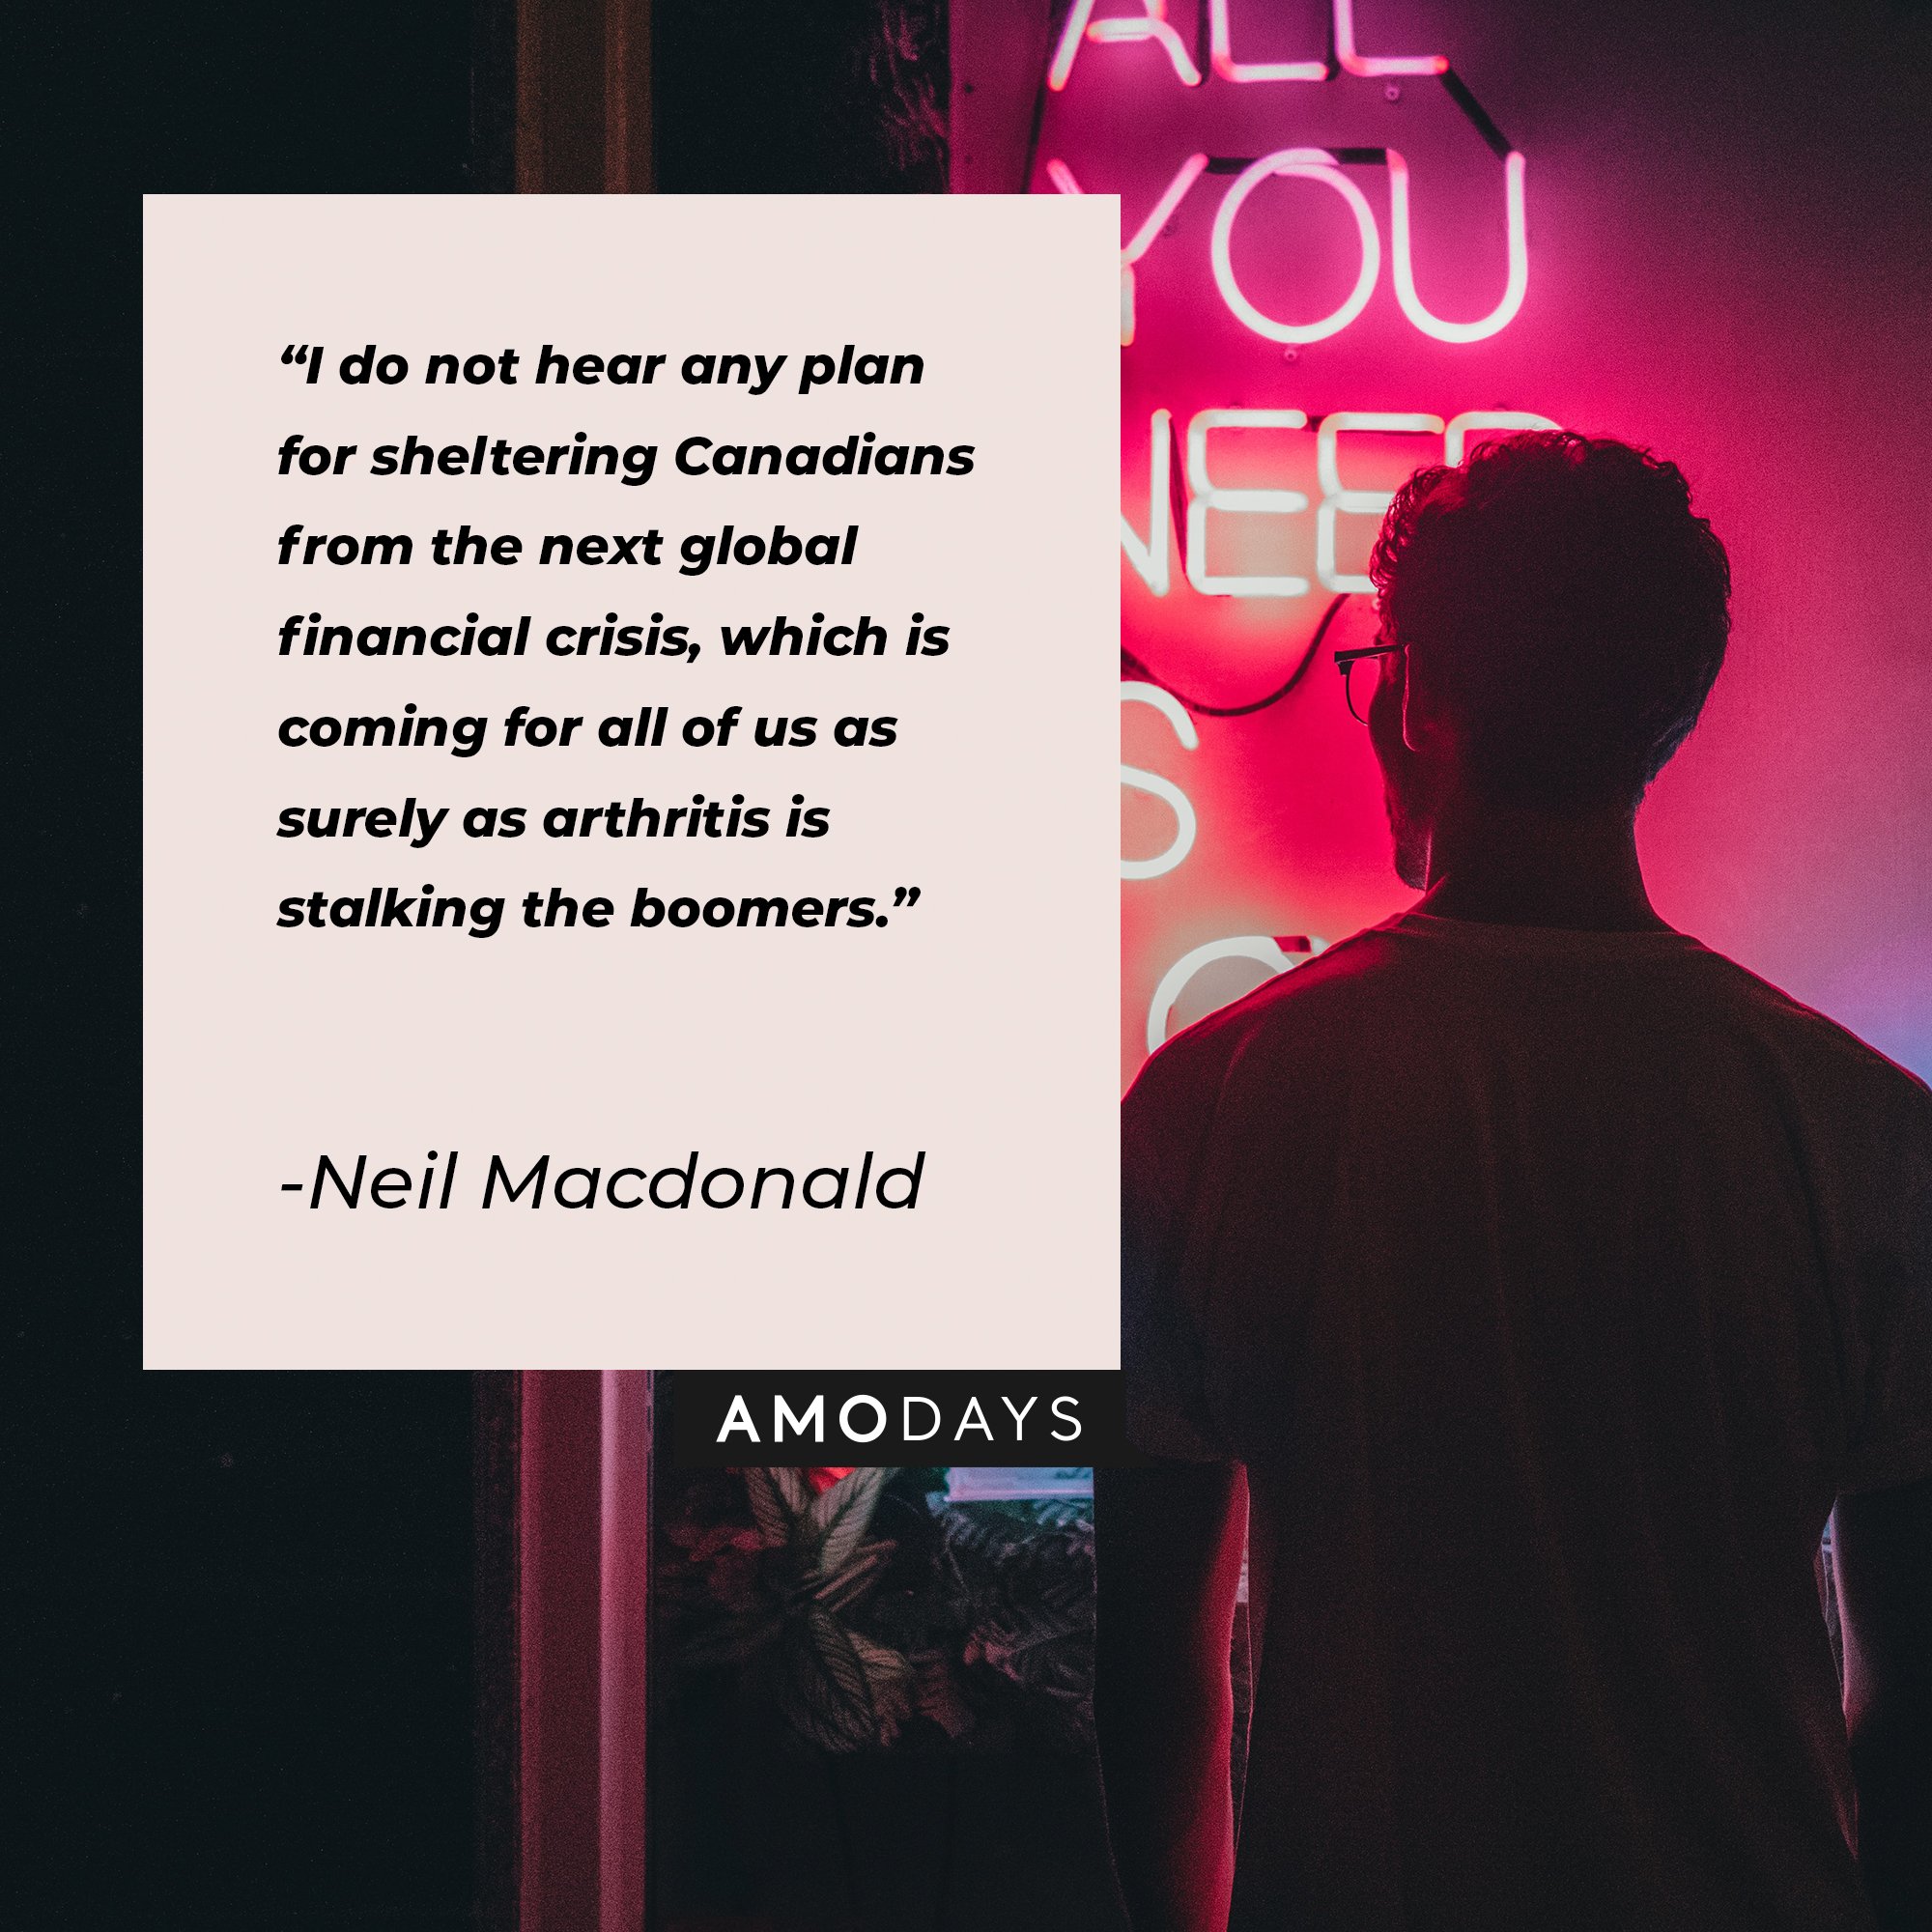 Neil Macdonald’s quote: “I do not hear any plan for sheltering Canadians from the next global financial crisis, which is coming for all of us as surely as arthritis is stalking the boomers." | Image: AmoDays